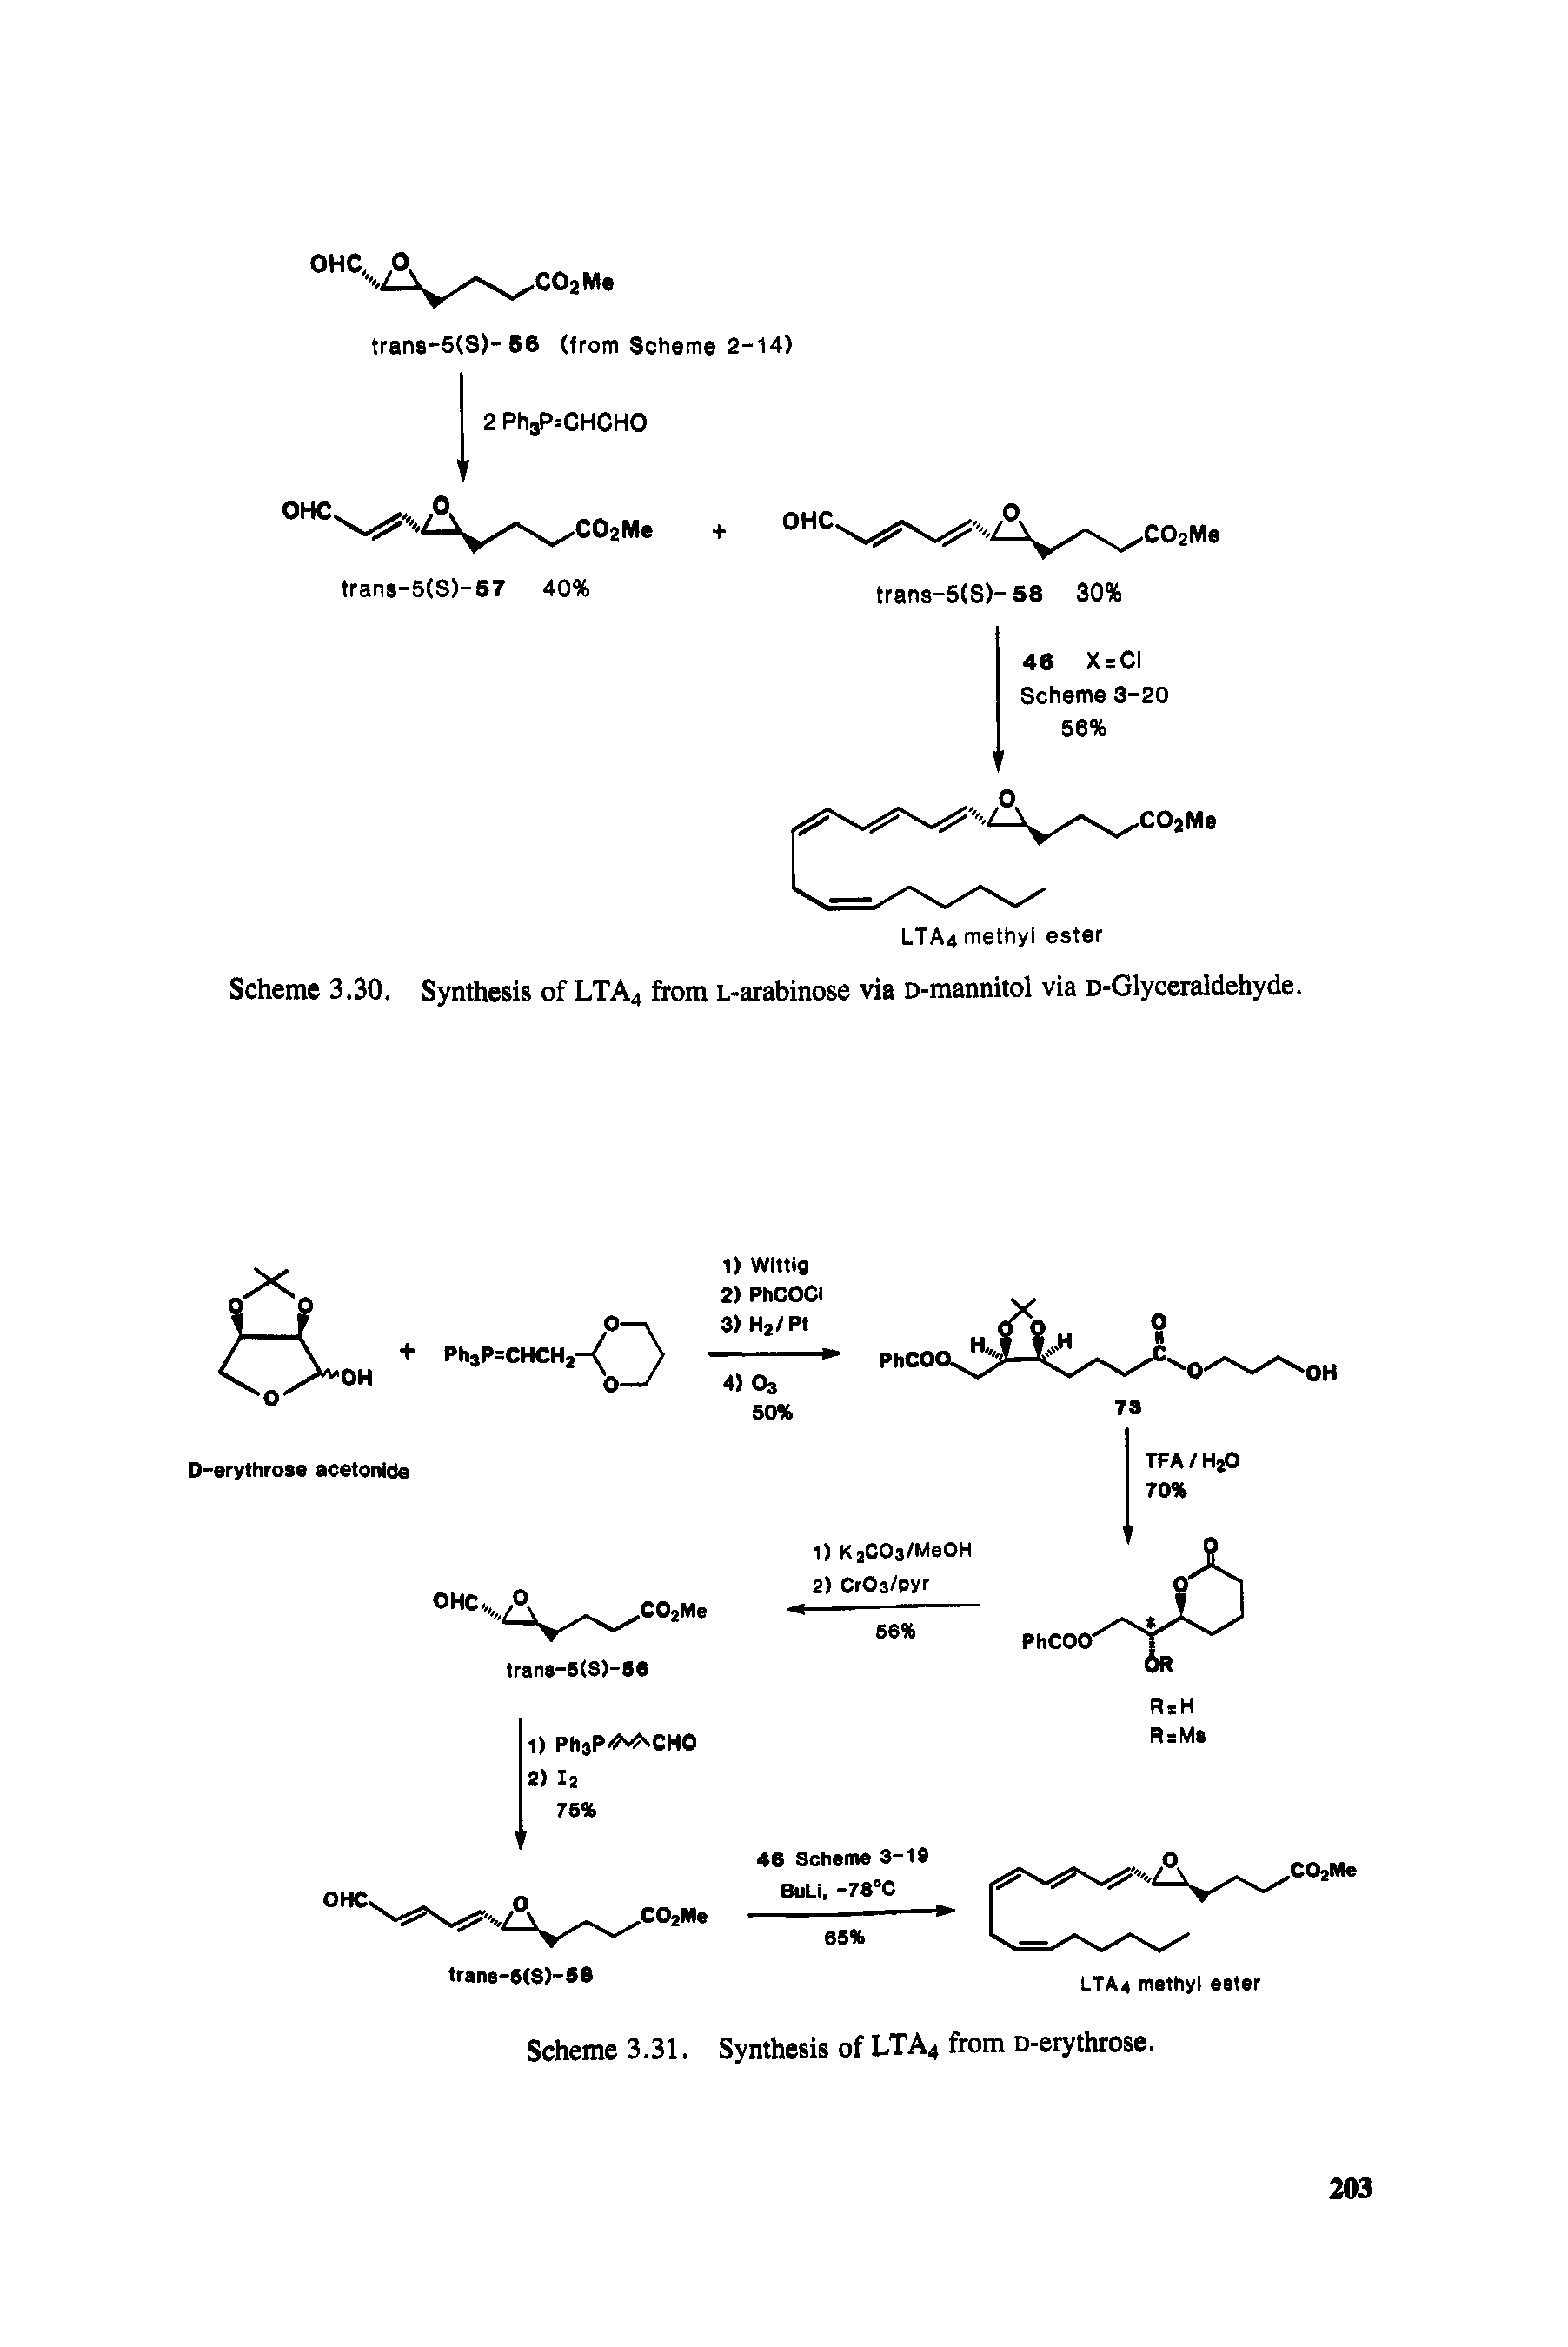 Scheme 3.30. Synthesis of LTA4 from L-arabinose via D-mannitol via D-Glyceraldehyde.